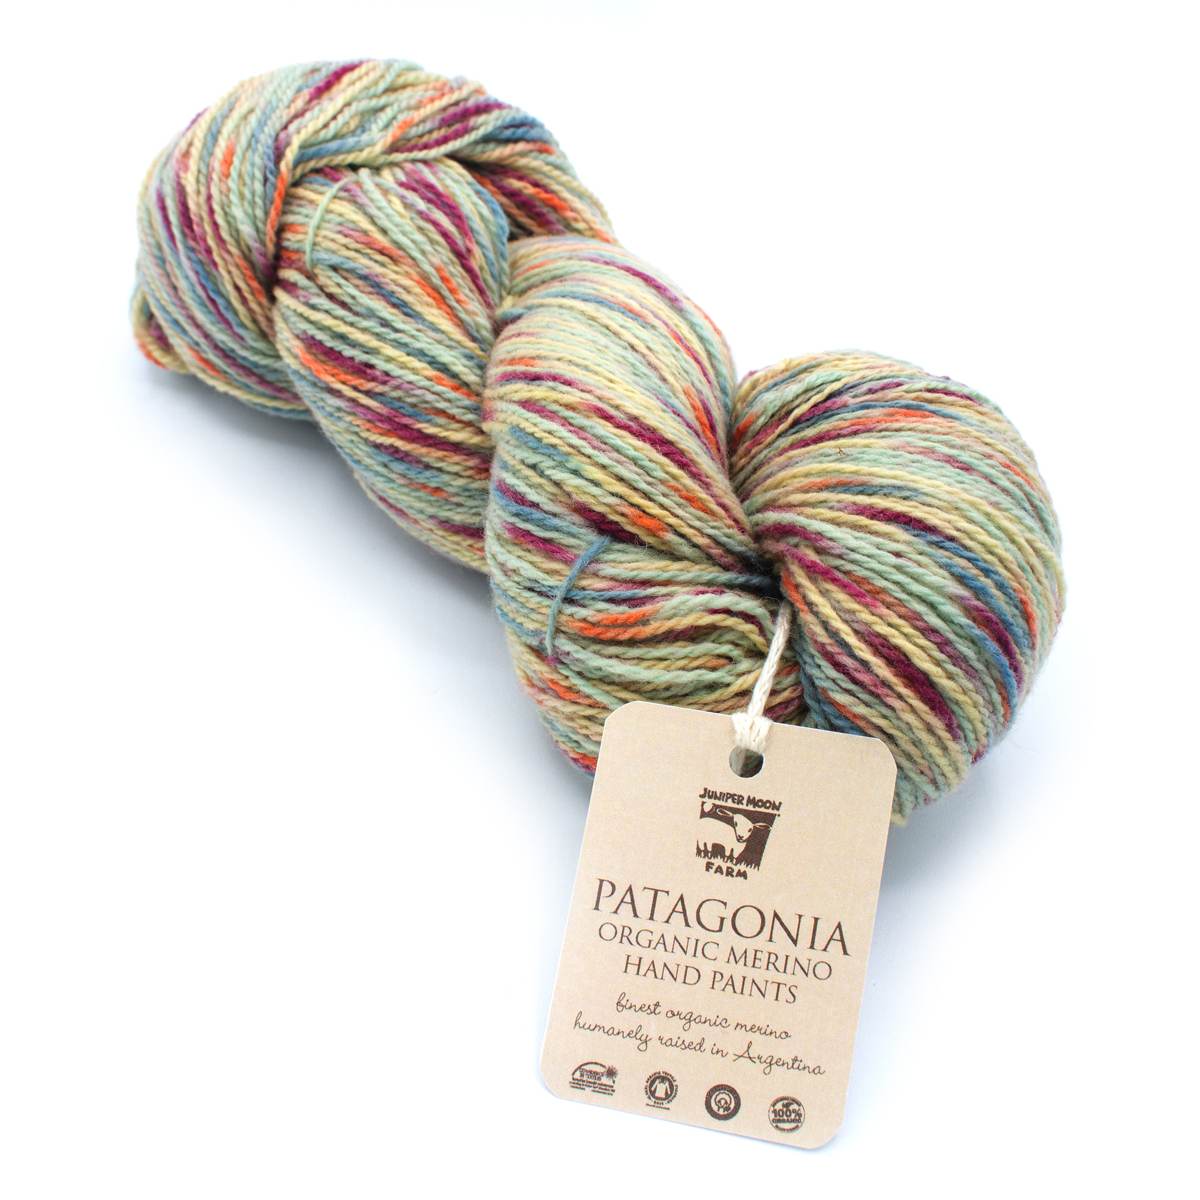 a skein of Patagonia Organic Merino Hand Paints